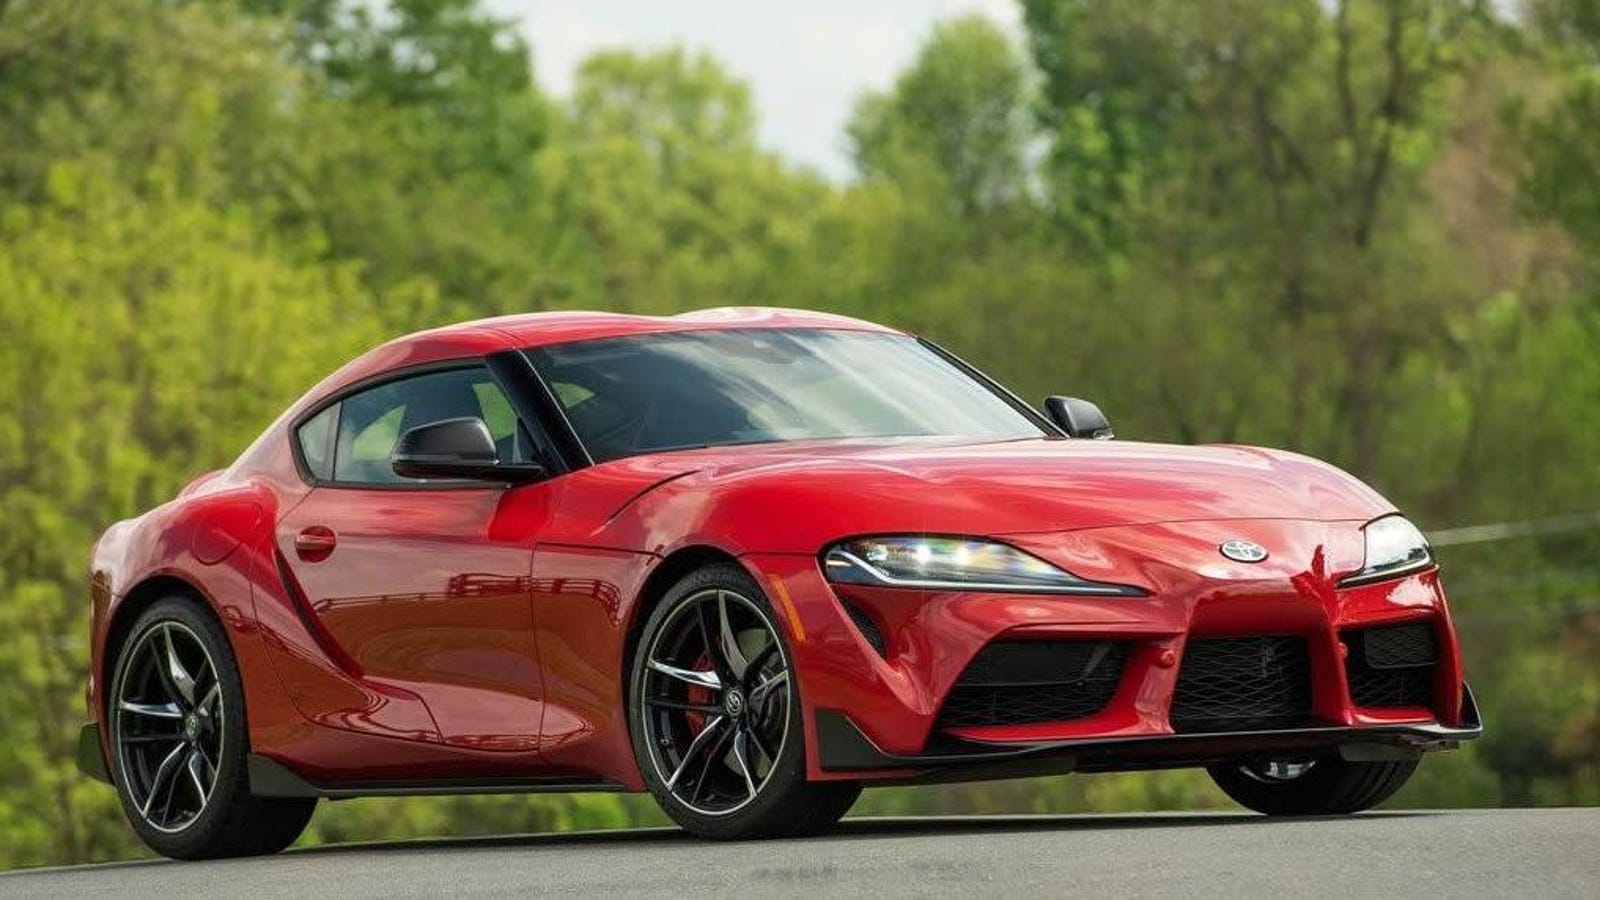 The Toyota Supra Is Going To Get More Variants And Extra Power - Jalopnik thumbnail